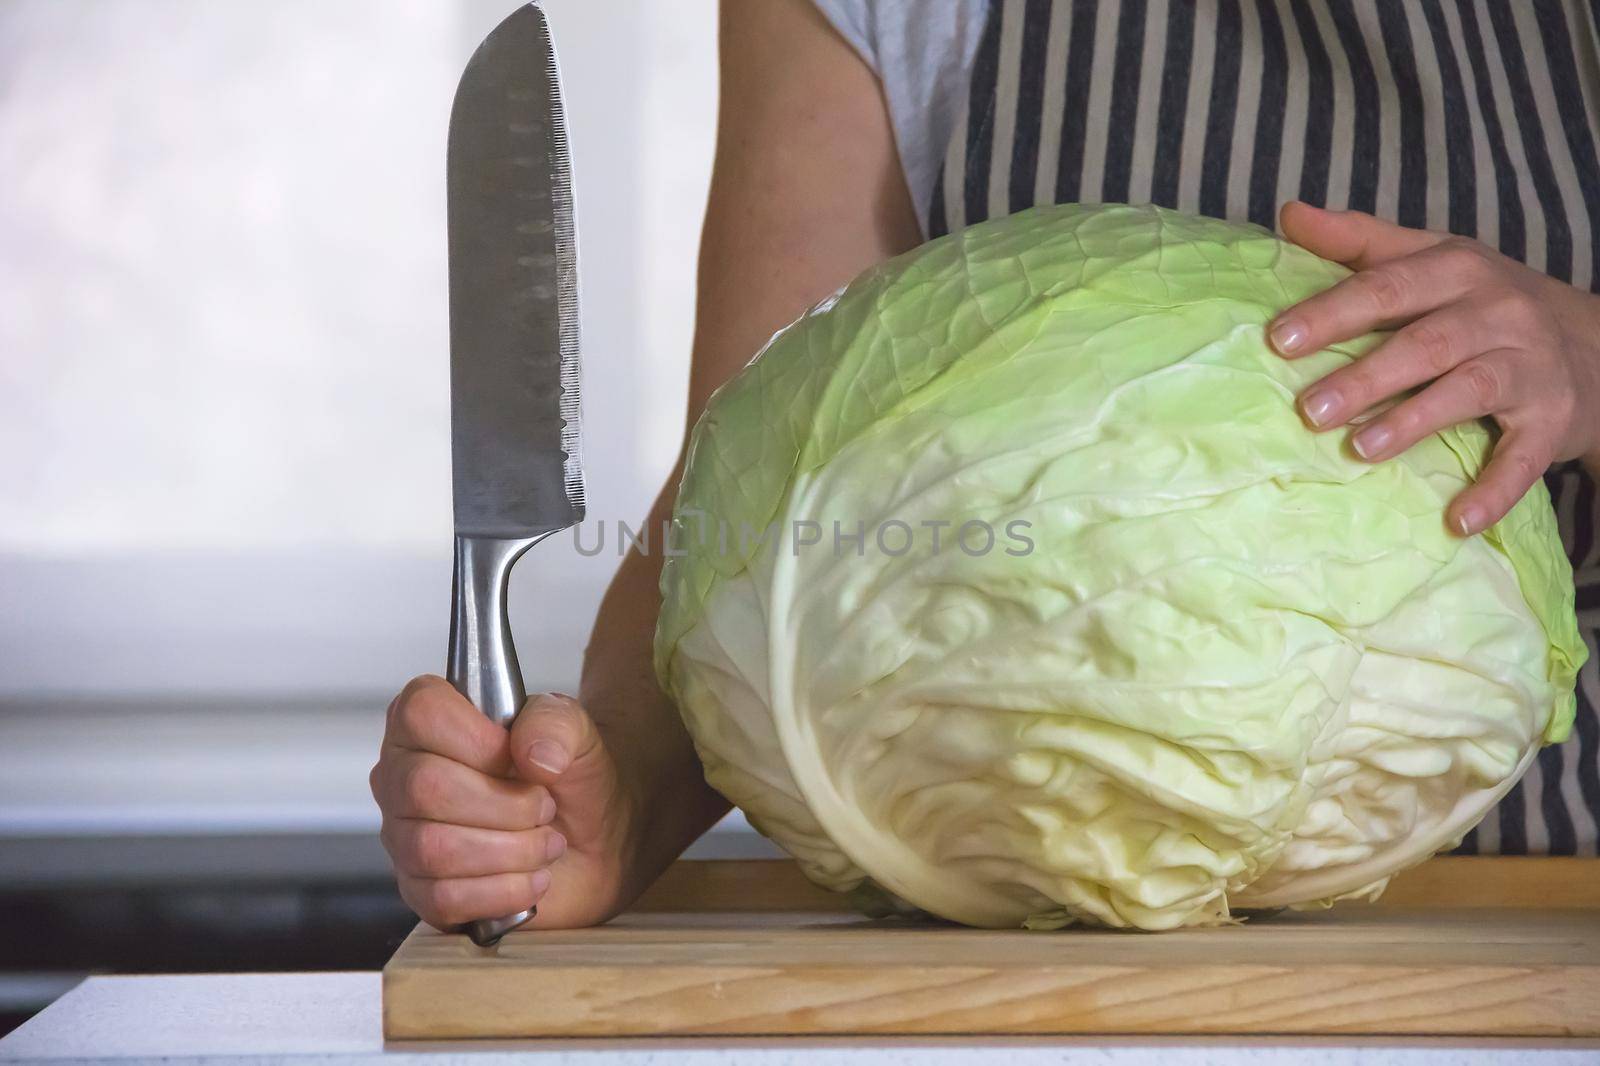 huge head of juicy cabbage lies on a cutting board, a woman holds a large vegetable knife in her hands. Cooking sauerkraut.